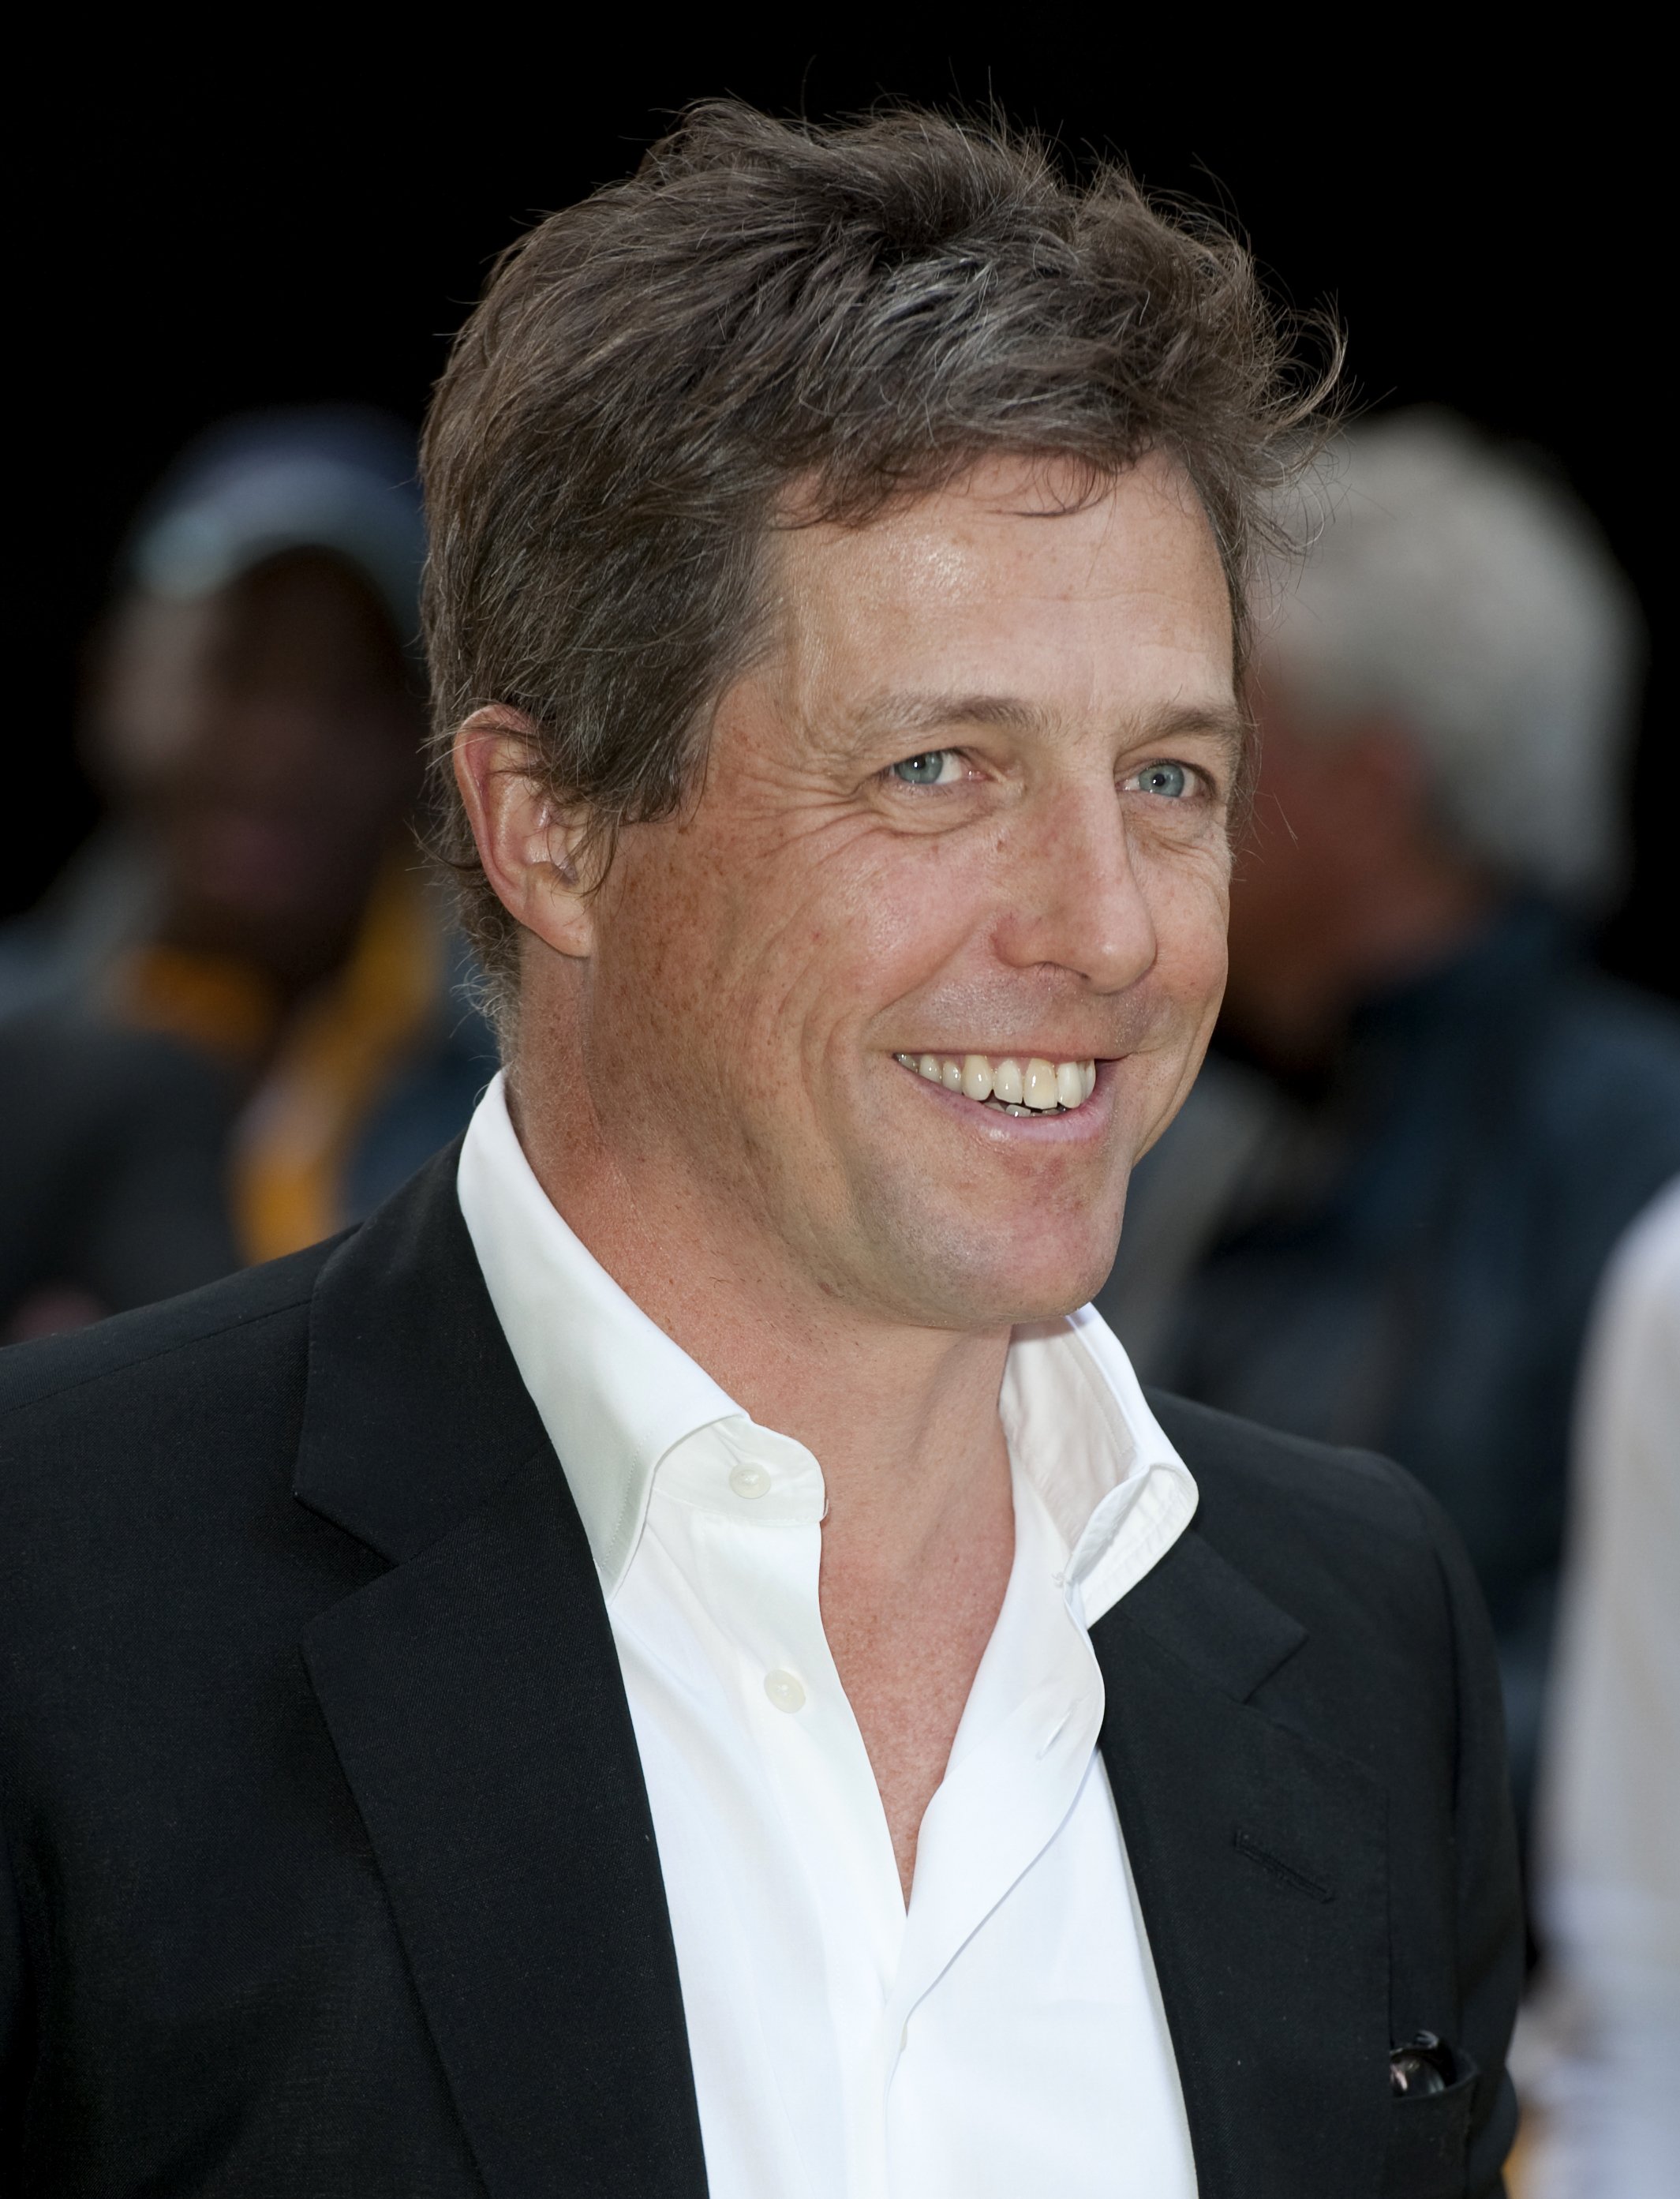 Hugh Grant Attends The European Premiere Of Fire In Babylon At Odeon Leicester Square On May 9, 2011 In London, England | Source: Getty Images 